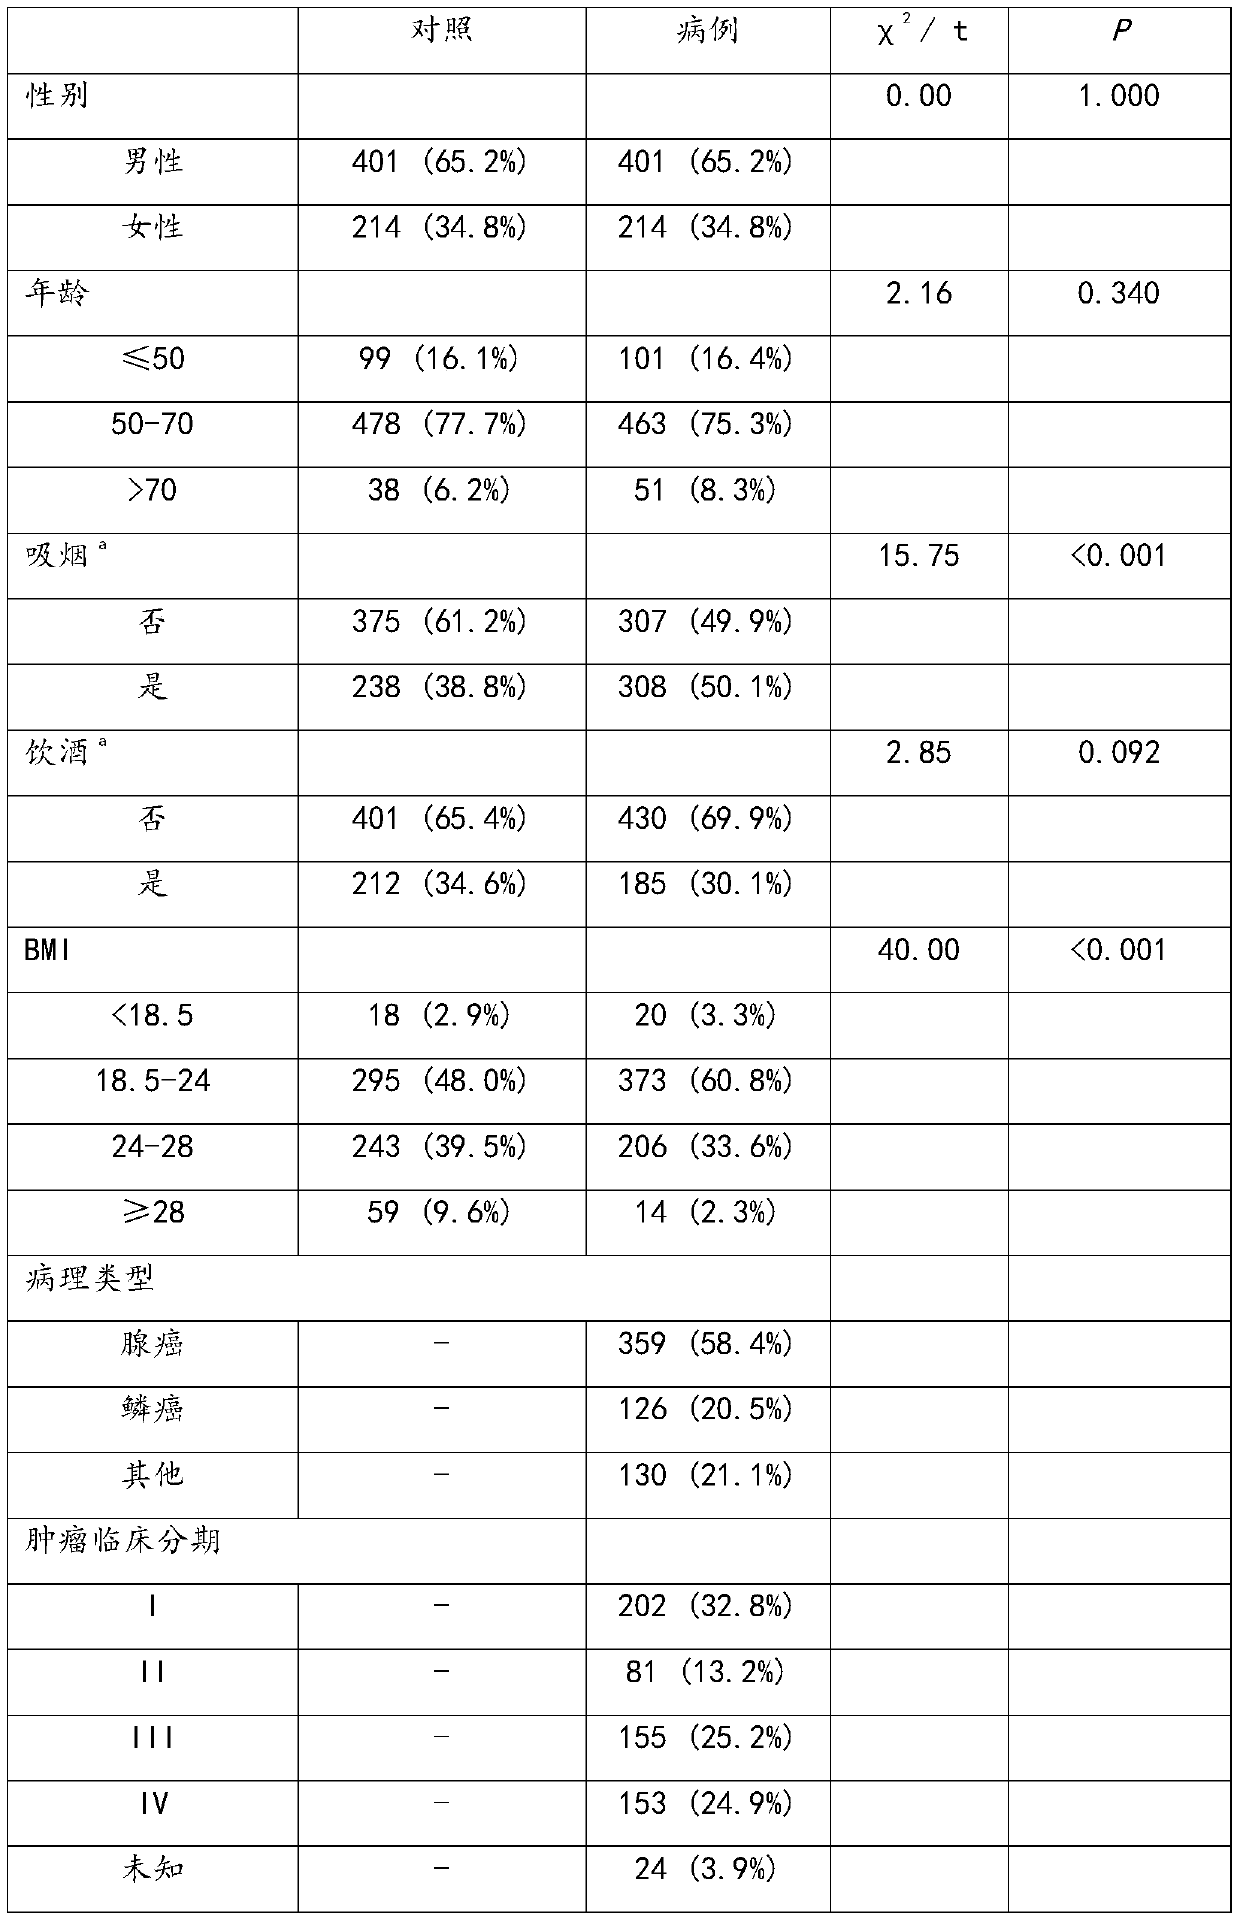 SNP marker related to auxiliary diagnosis of Chinese non-small cell lung cancer and application thereof